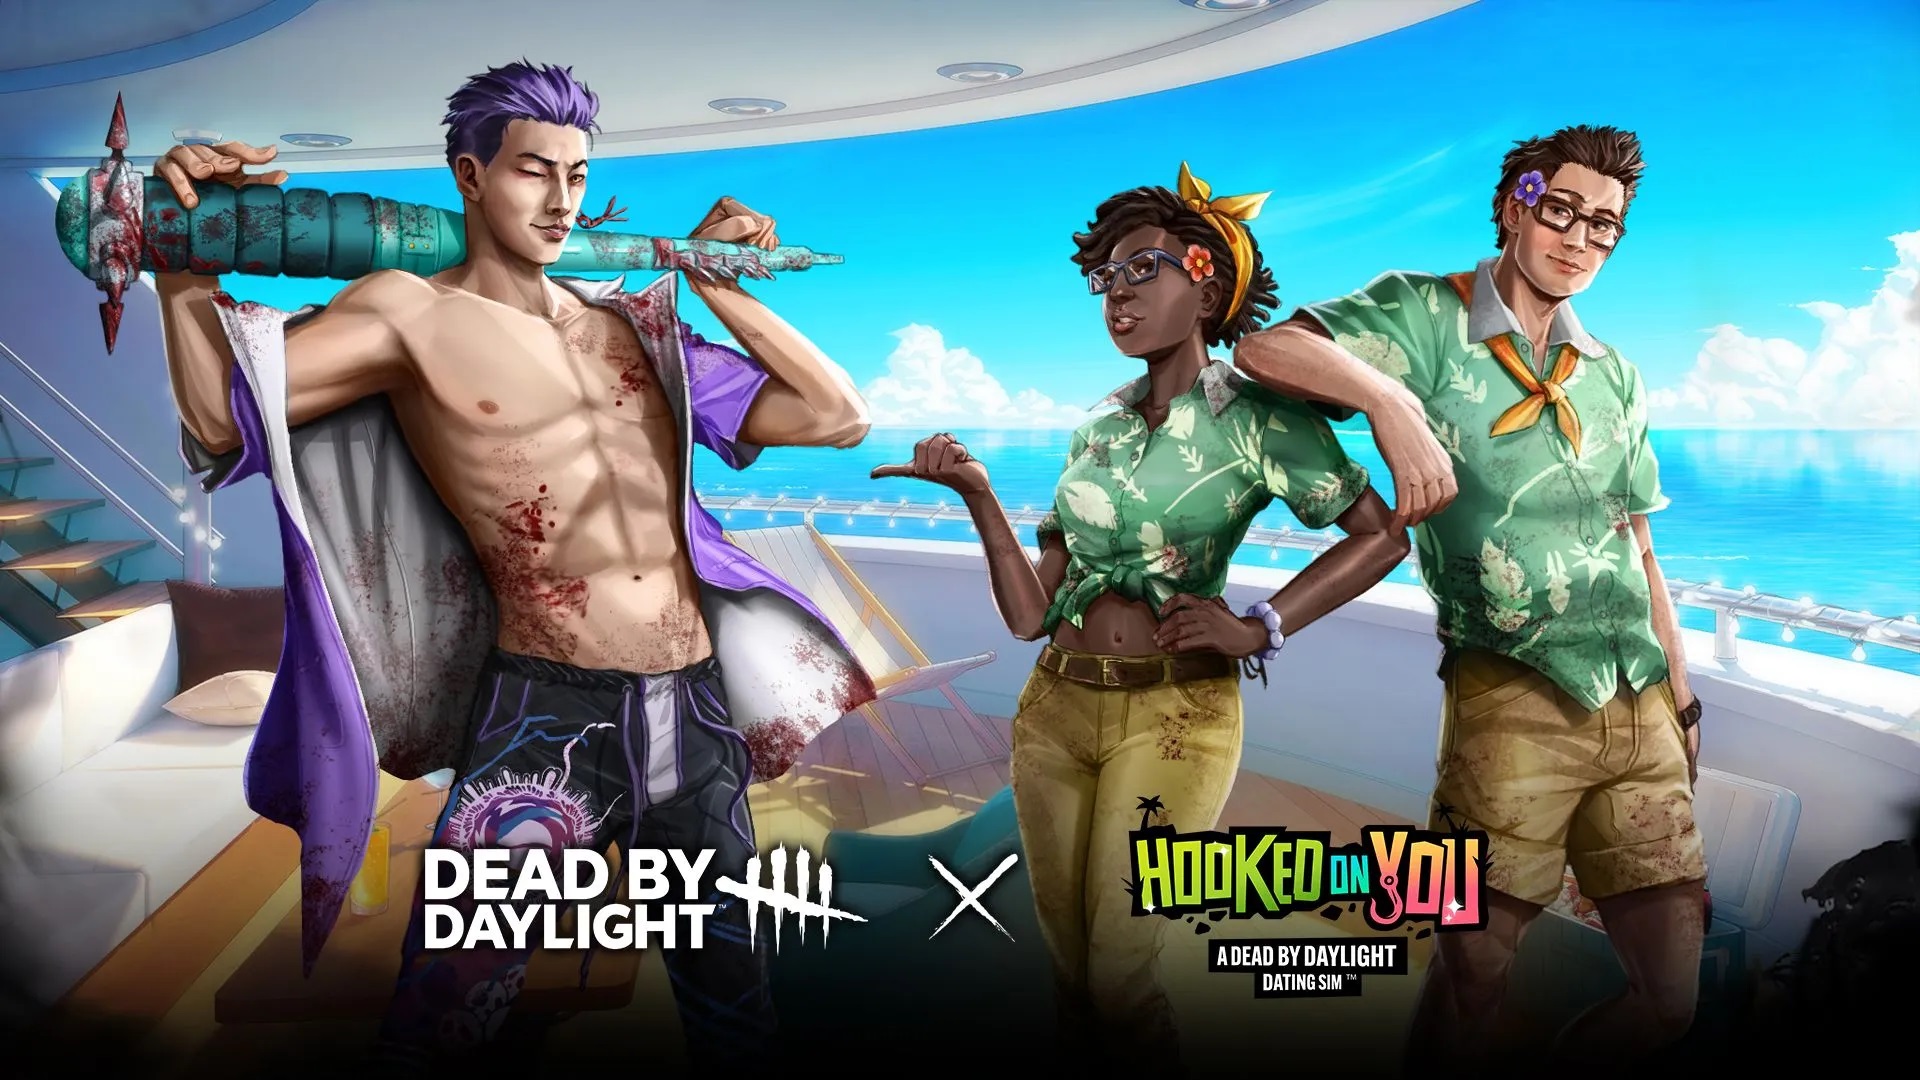 Hooked on You: A Dead by Daylight Dating Sim Review